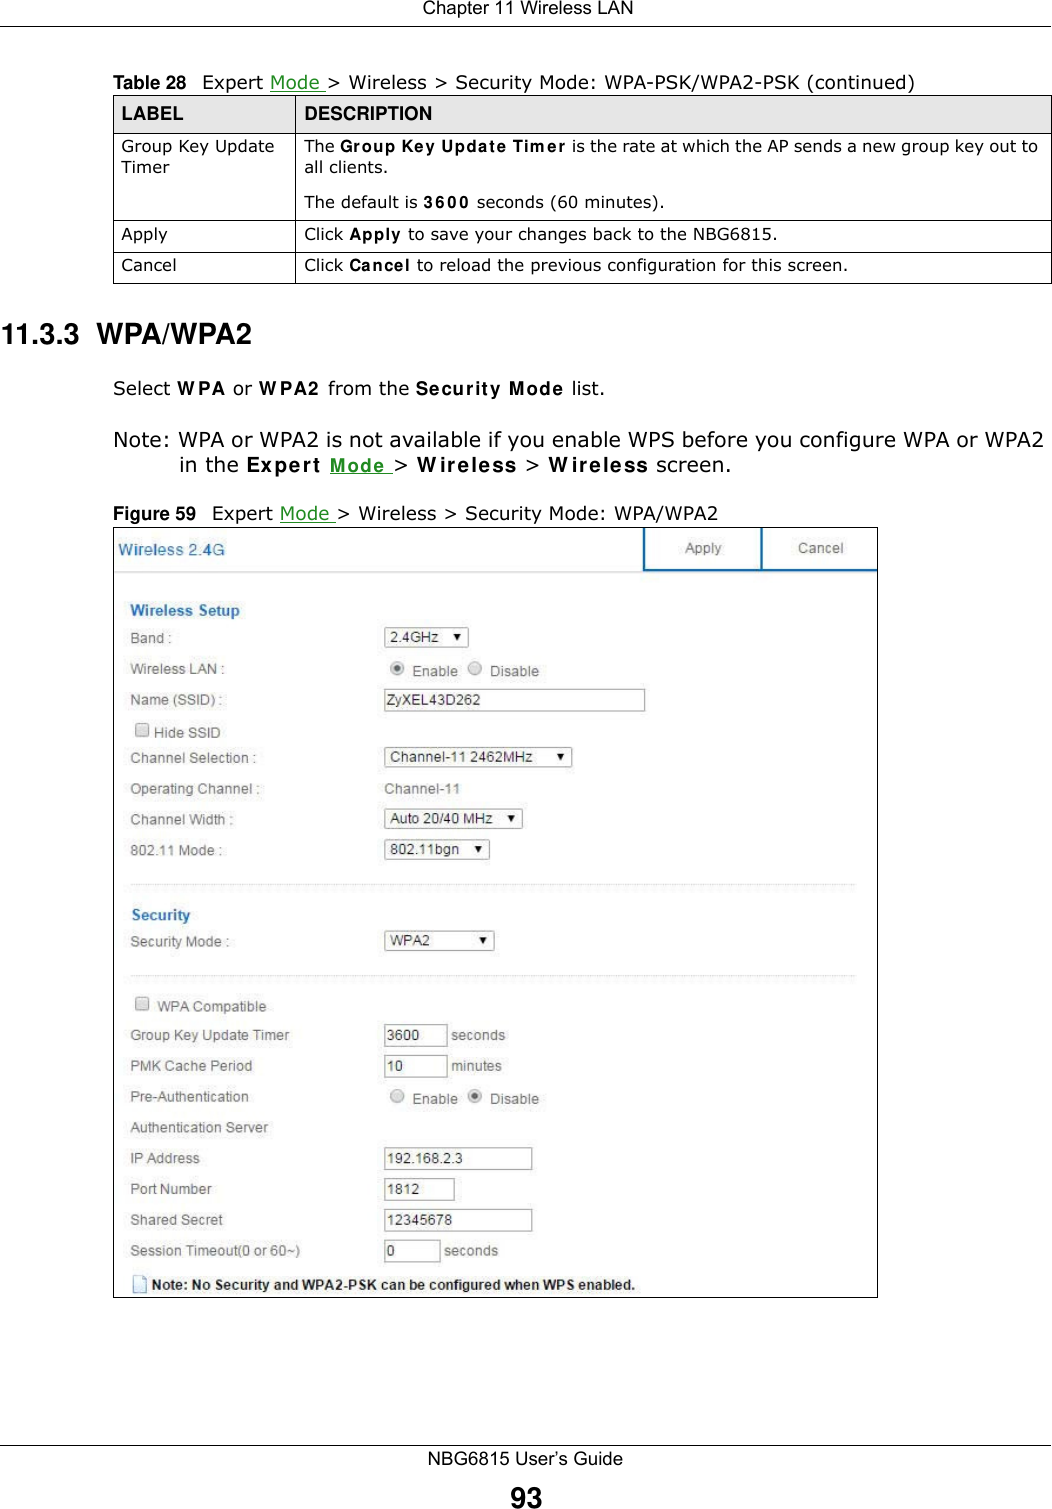  Chapter 11 Wireless LANNBG6815 User’s Guide9311.3.3  WPA/WPA2Select WPA or WPA2 from the Security Mode list. Note: WPA or WPA2 is not available if you enable WPS before you configure WPA or WPA2 in the Expert Mode &gt; Wireless &gt; Wireless screen.Figure 59   Expert Mode &gt; Wireless &gt; Security Mode: WPA/WPA2Group Key Update TimerThe Group Key Update Timer is the rate at which the AP sends a new group key out to all clients. The default is 3600 seconds (60 minutes).Apply Click Apply to save your changes back to the NBG6815.Cancel Click Cancel to reload the previous configuration for this screen.Table 28   Expert Mode &gt; Wireless &gt; Security Mode: WPA-PSK/WPA2-PSK (continued)LABEL DESCRIPTION